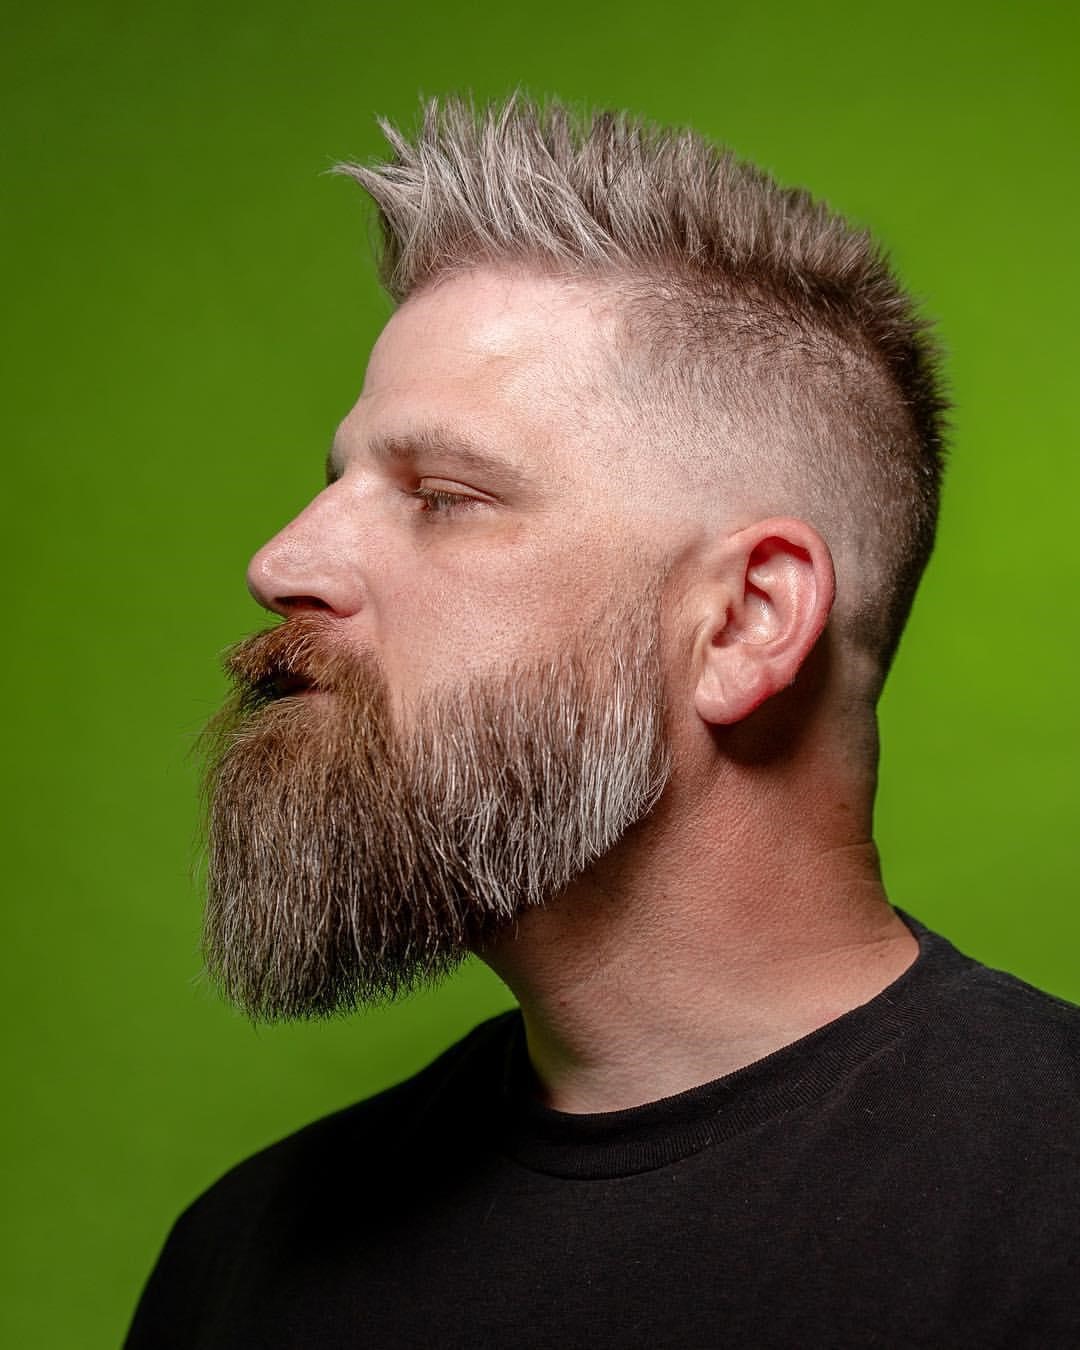 Try these beard styles for a total transformation of your looks